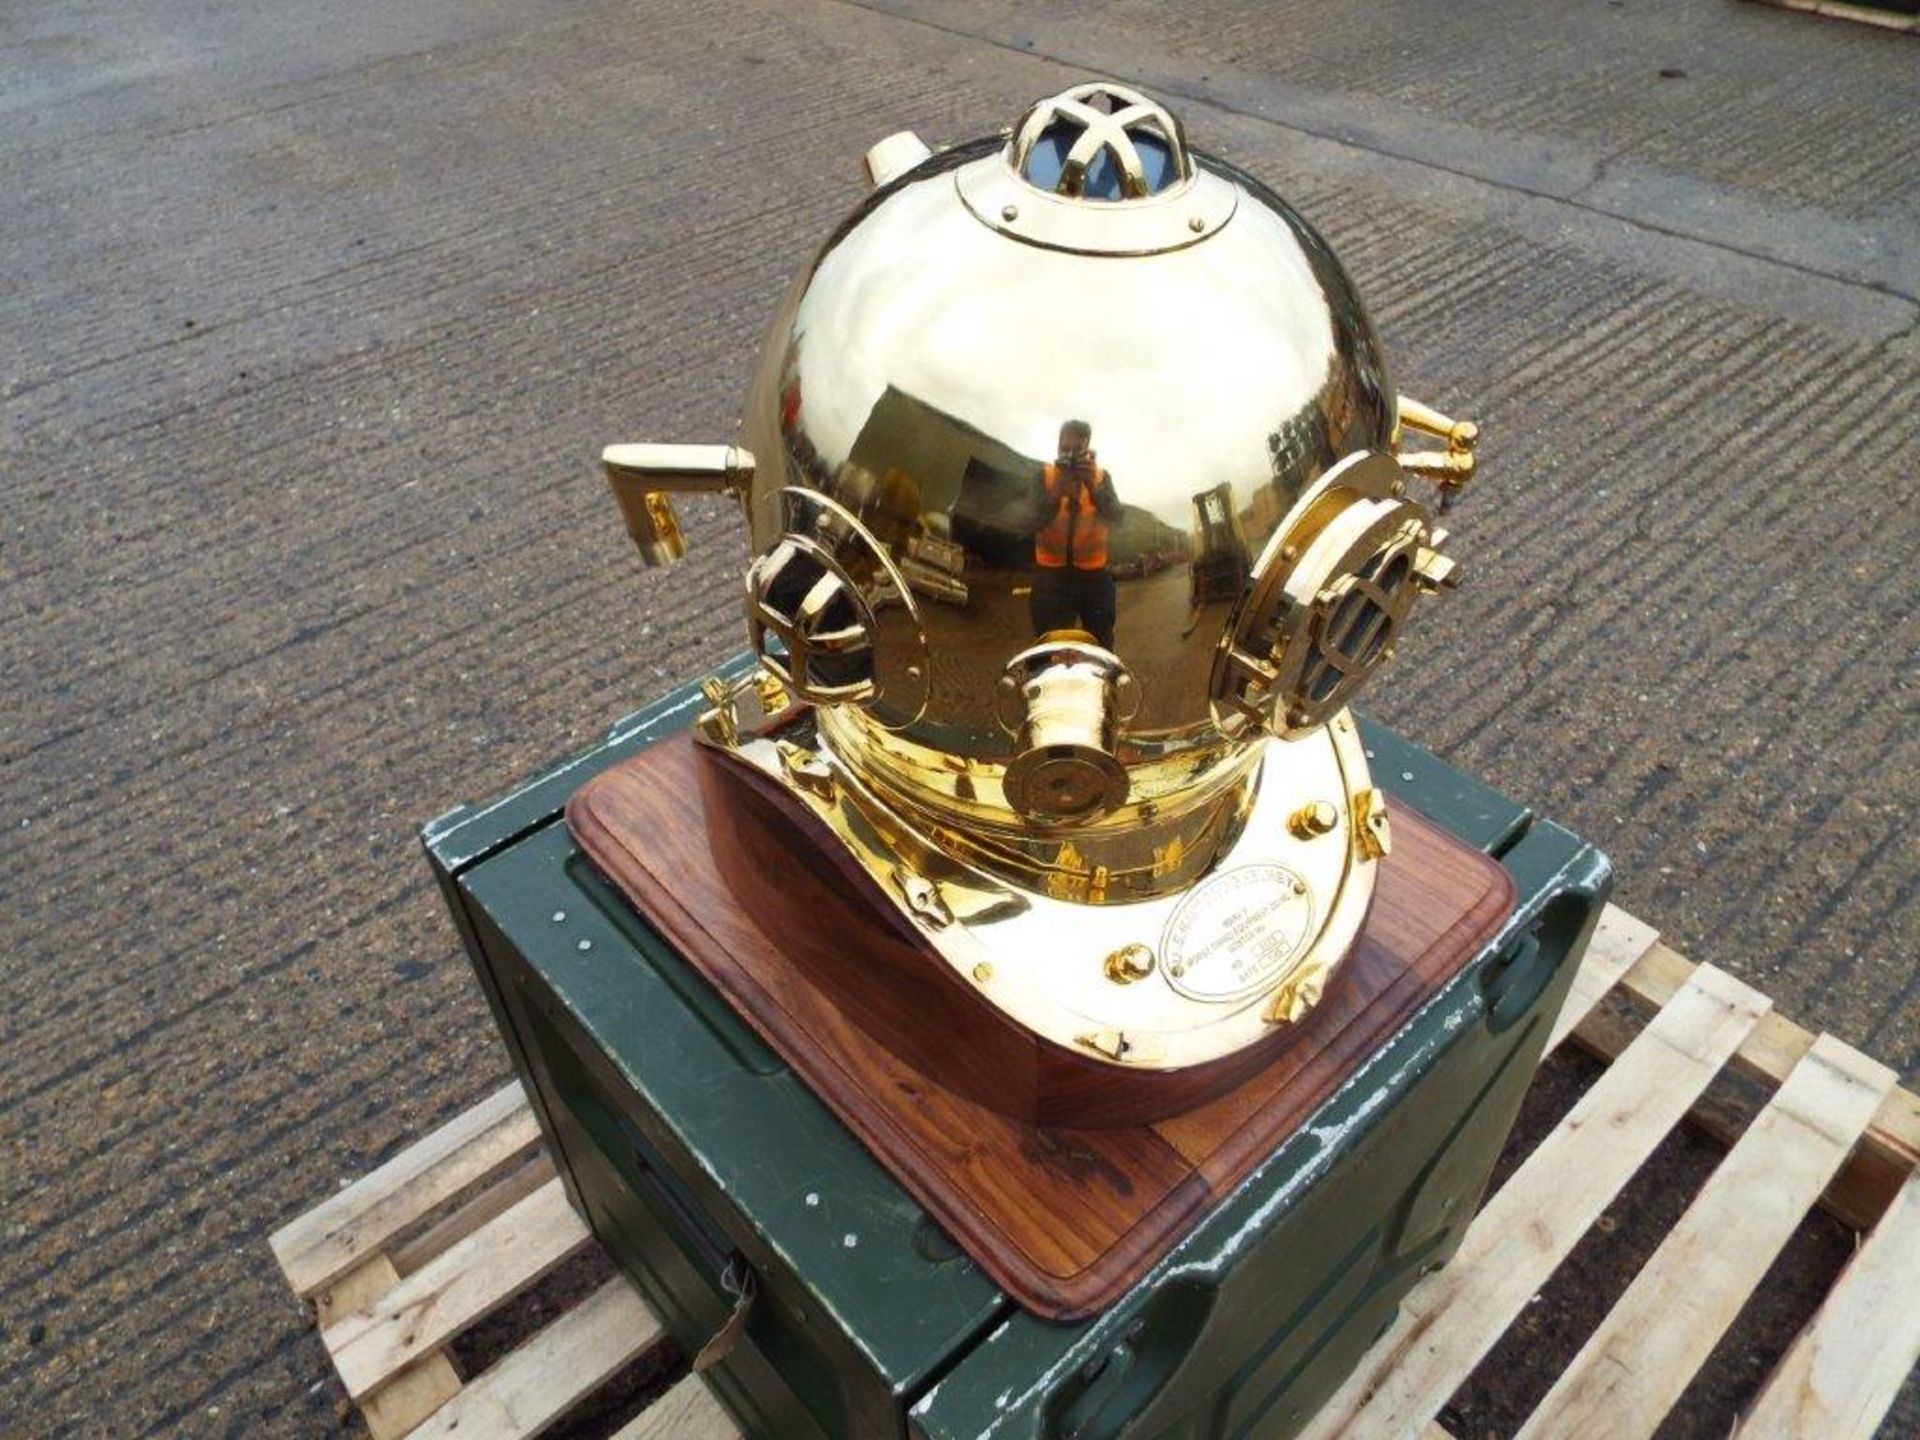 Replica Full Size U.S. Navy Mark V Brass Diving Helmet on Wooden Display Stand - Image 2 of 6